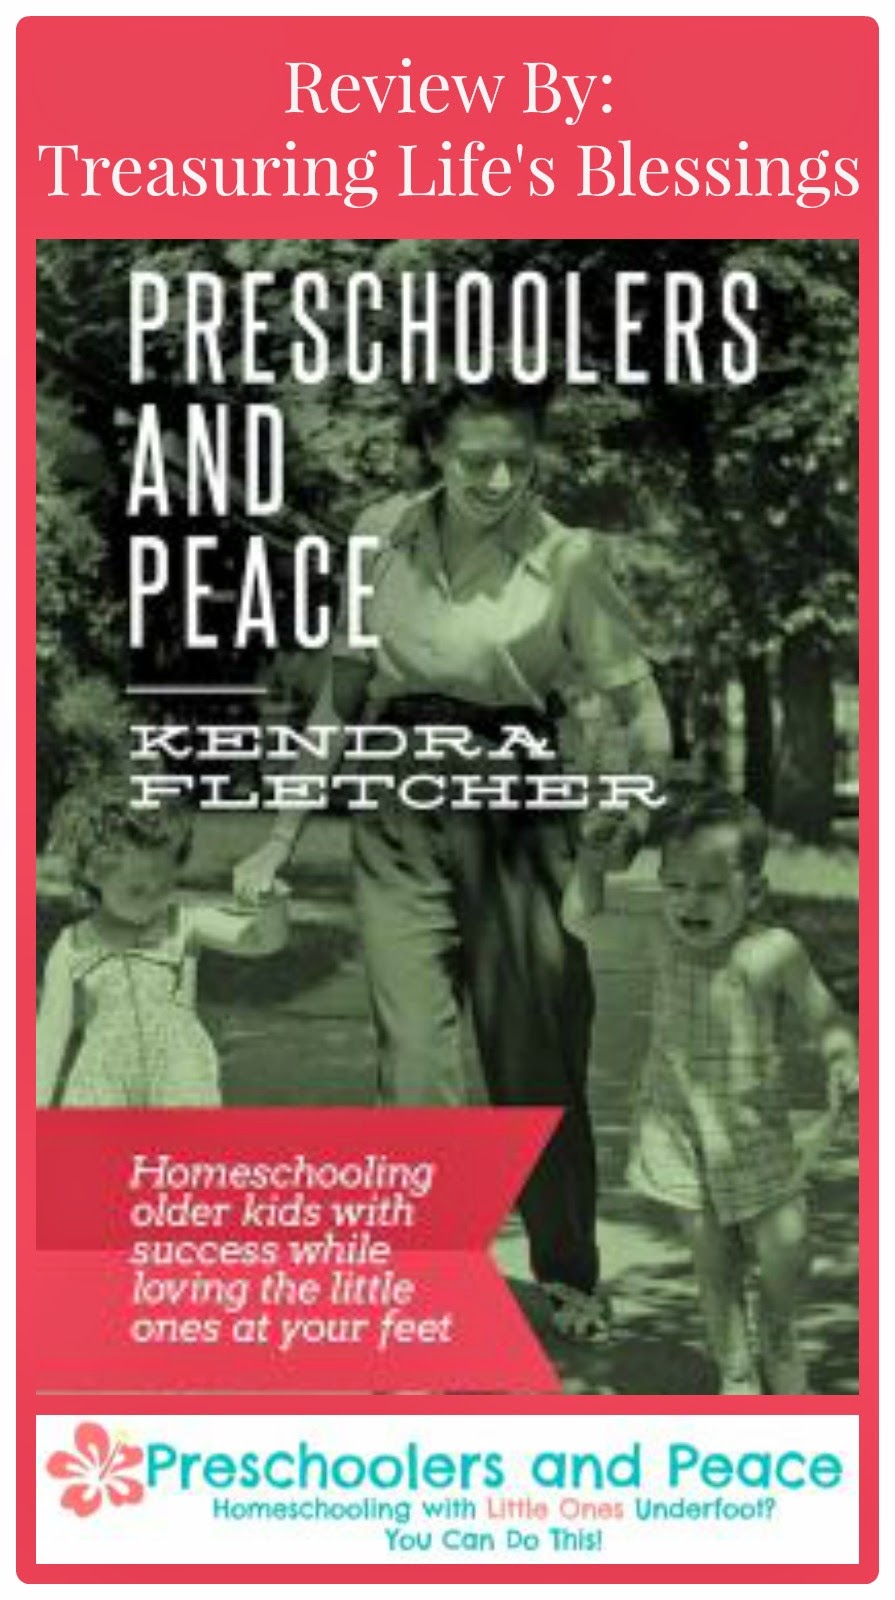 Preschoolers and Peace